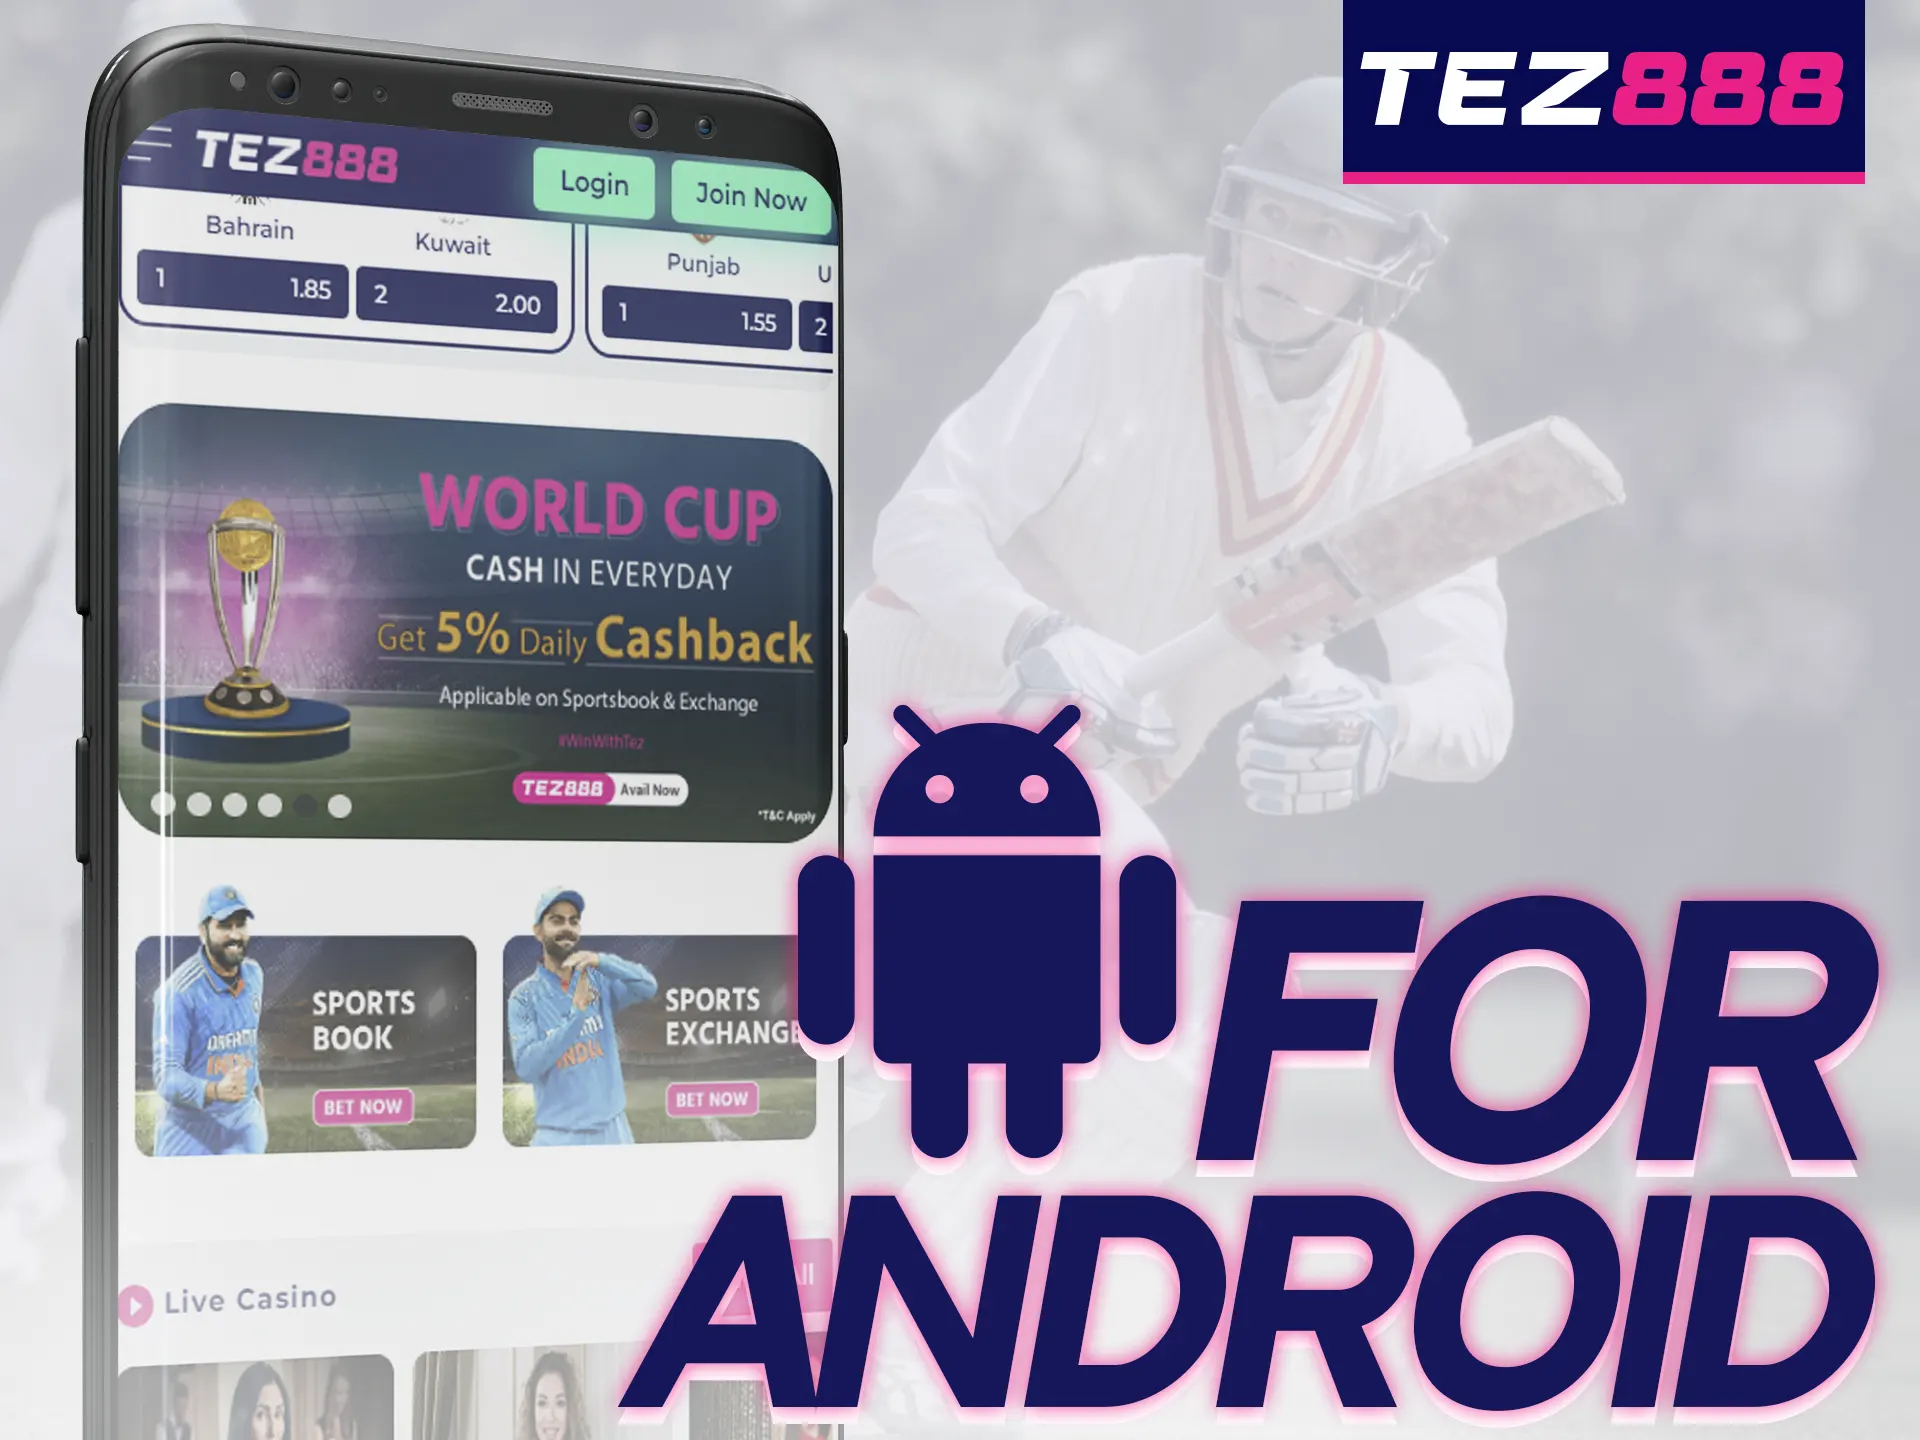 Download the APK file to your Android device to install the Tez888 application.